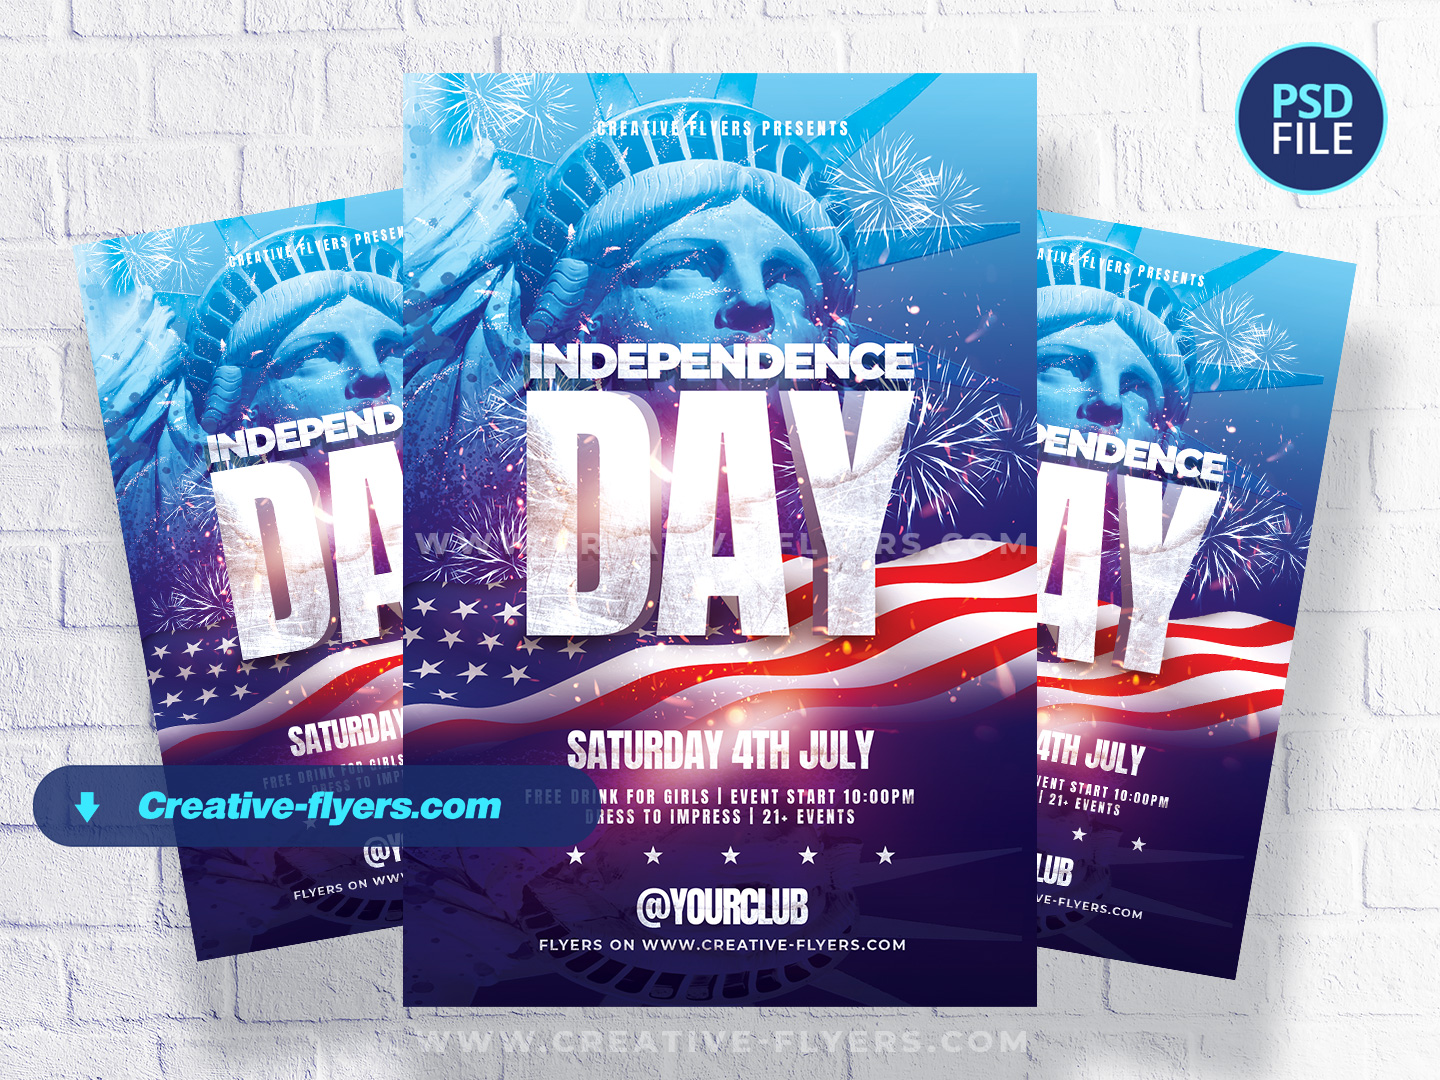 Flyer for The Independence Day